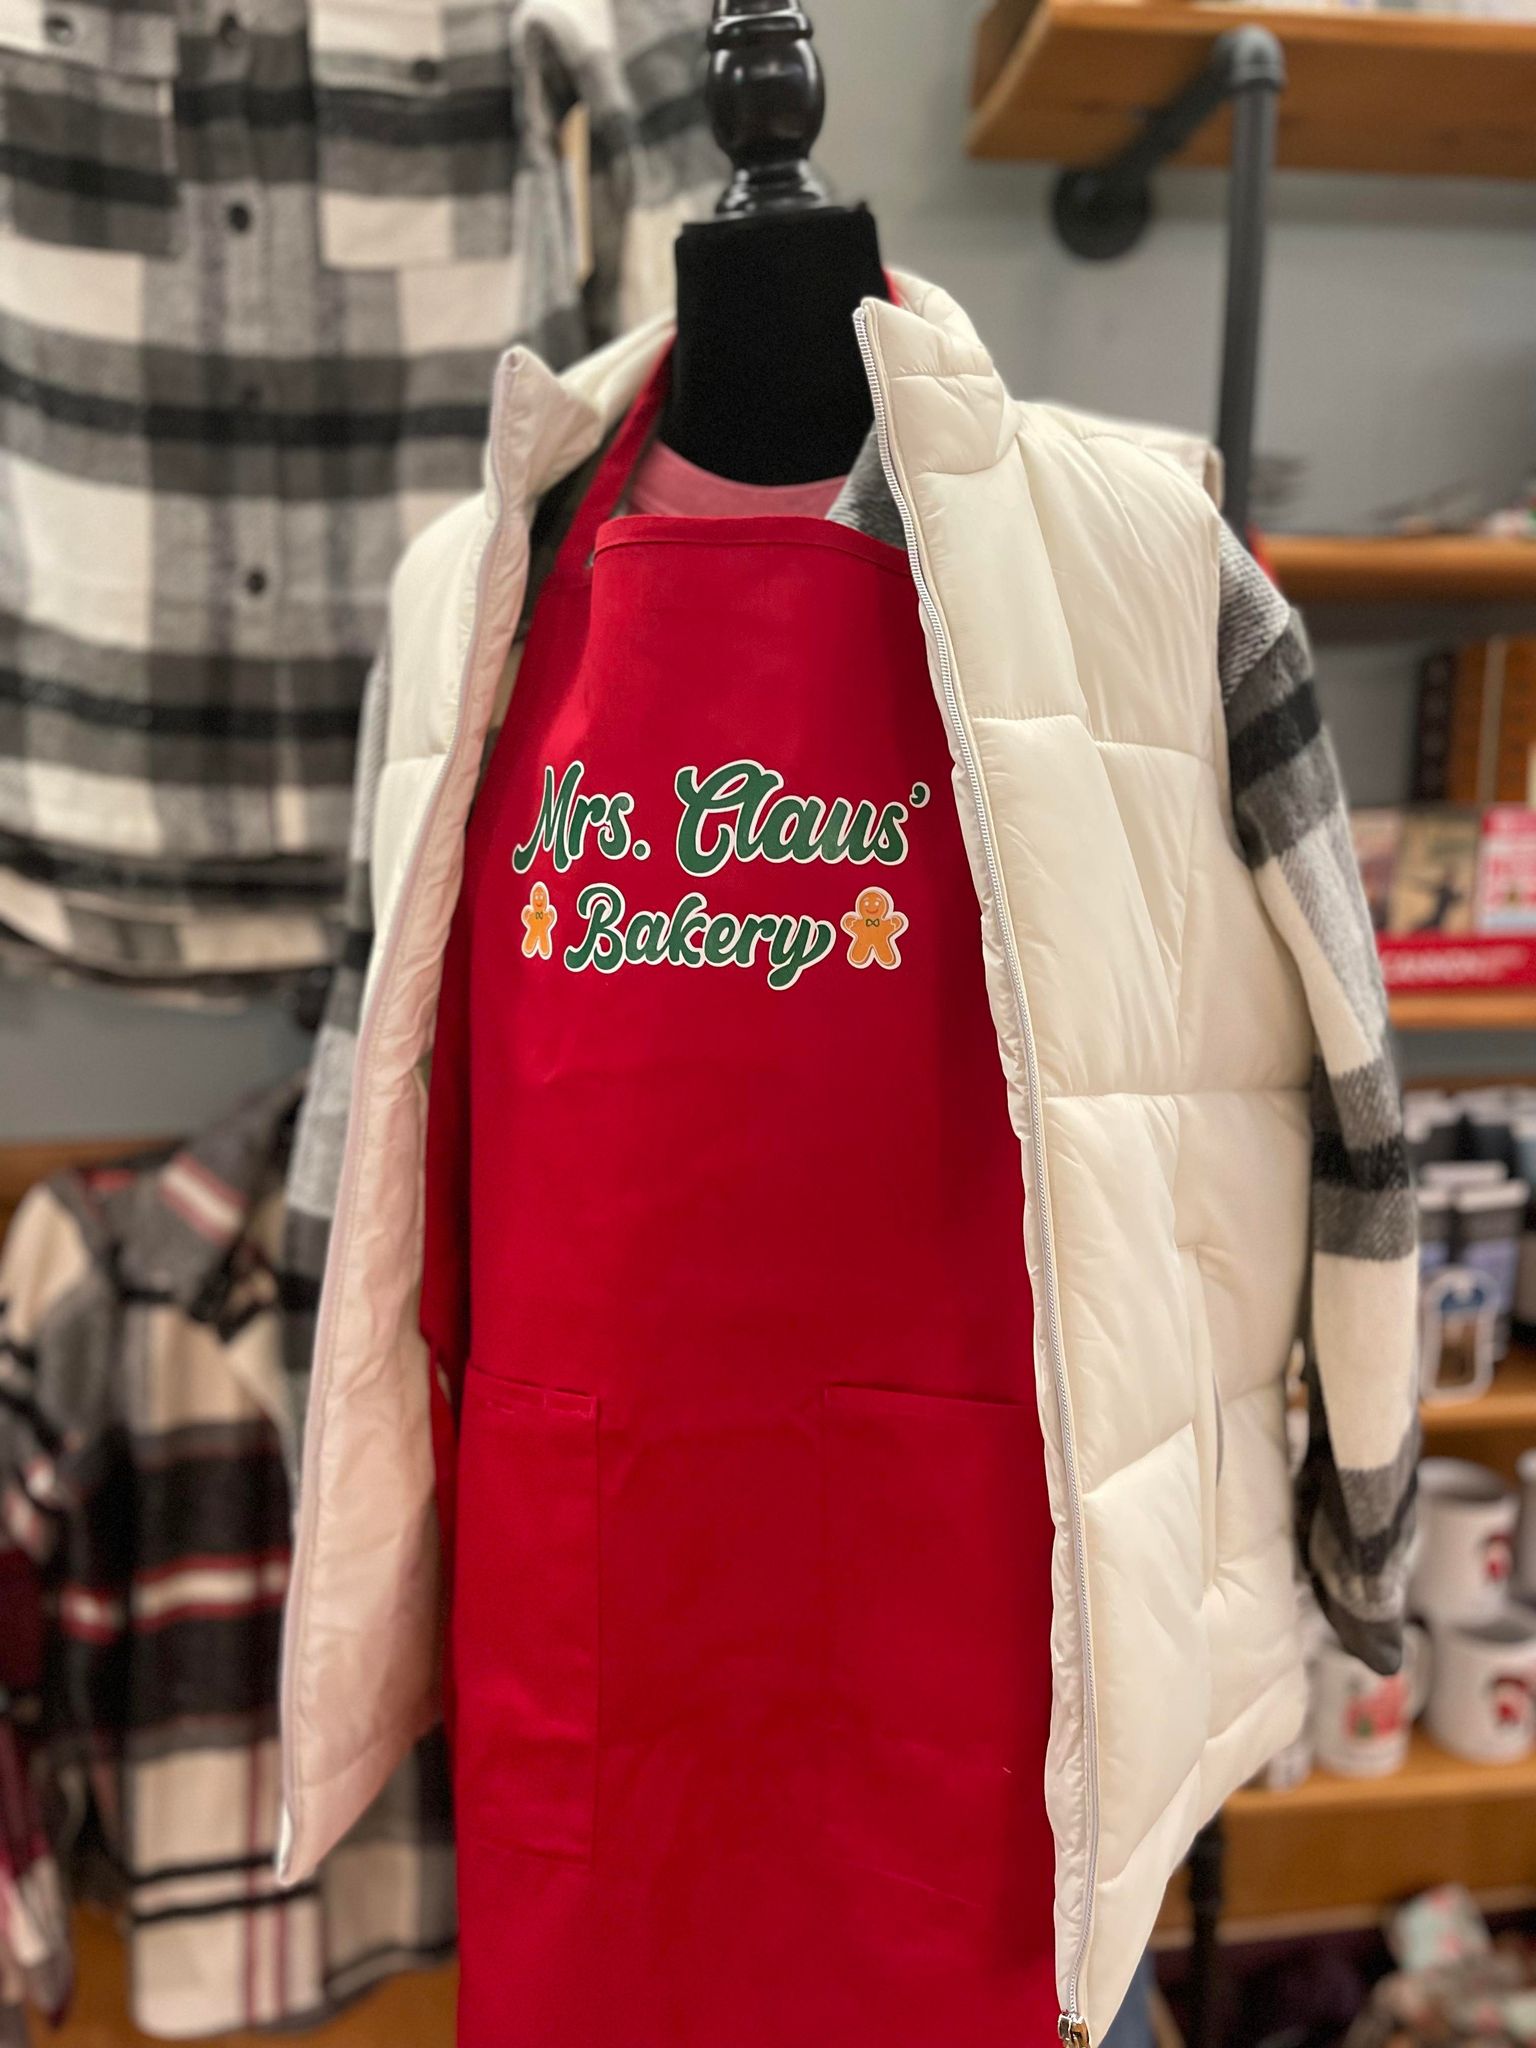 MRS. CLAUS' BAKERY APRON